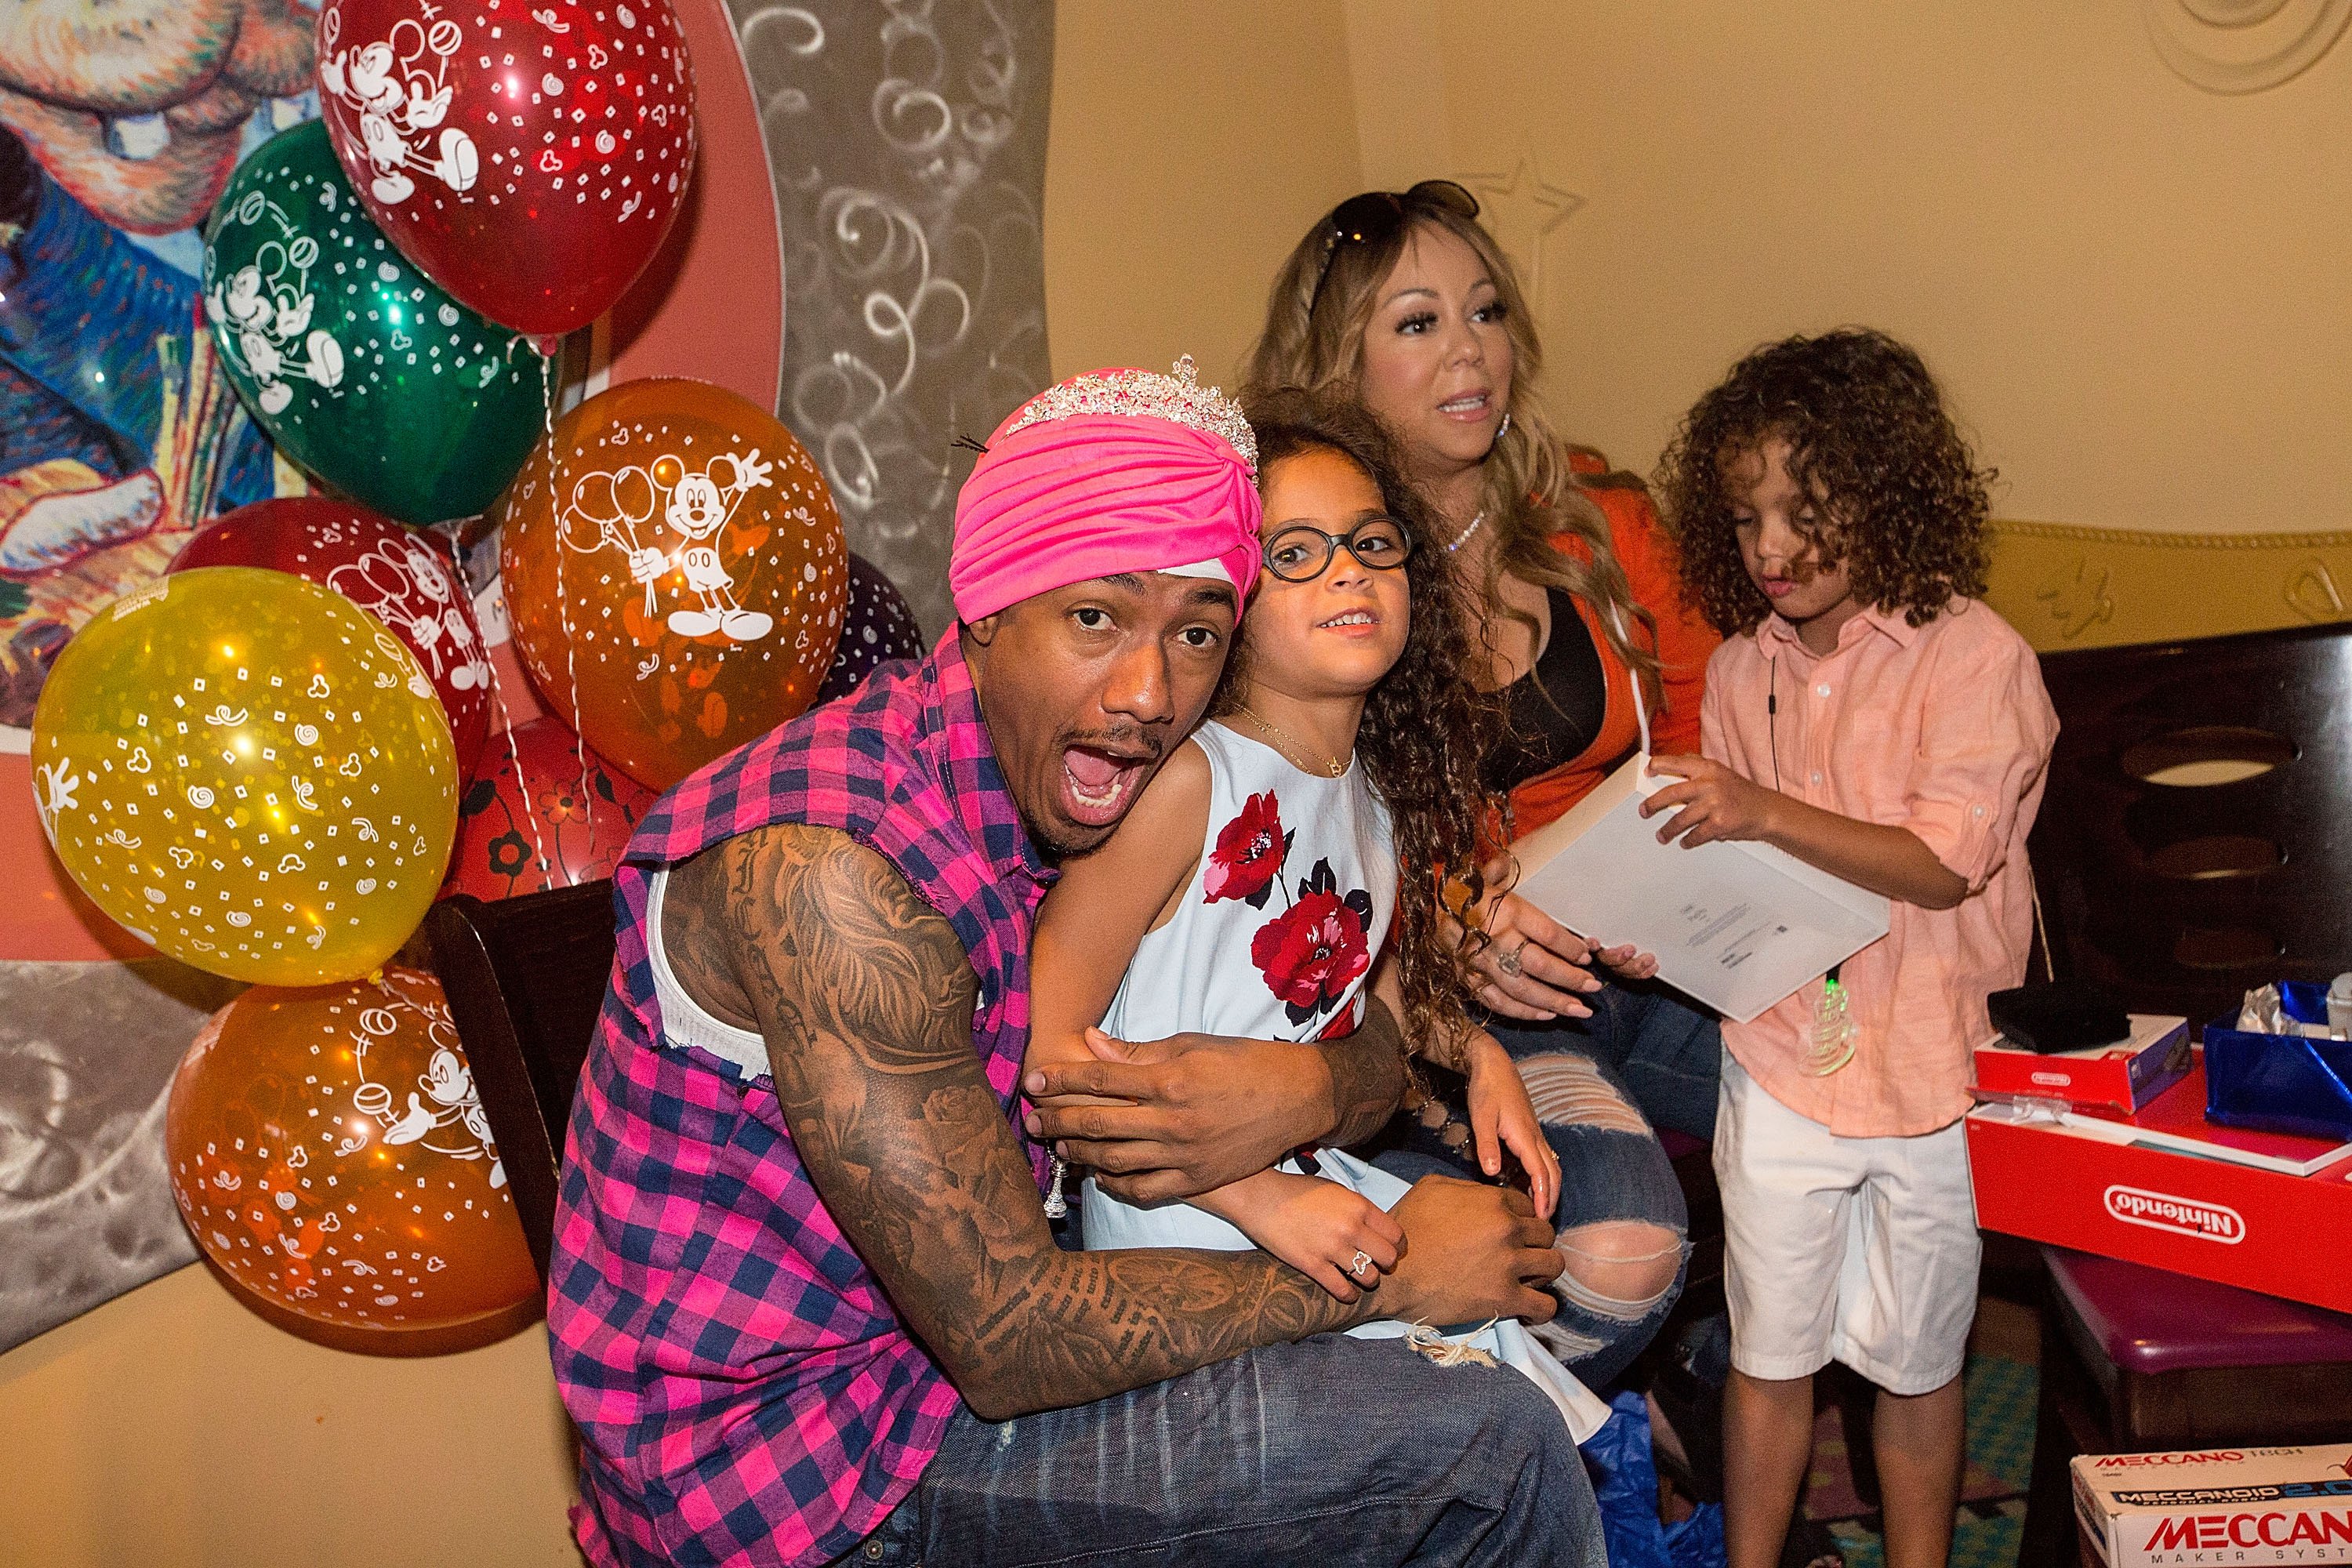 Nick Cannon and Mariah Carey photographed with their children Moroccan and Monroe | Source: Getty Images